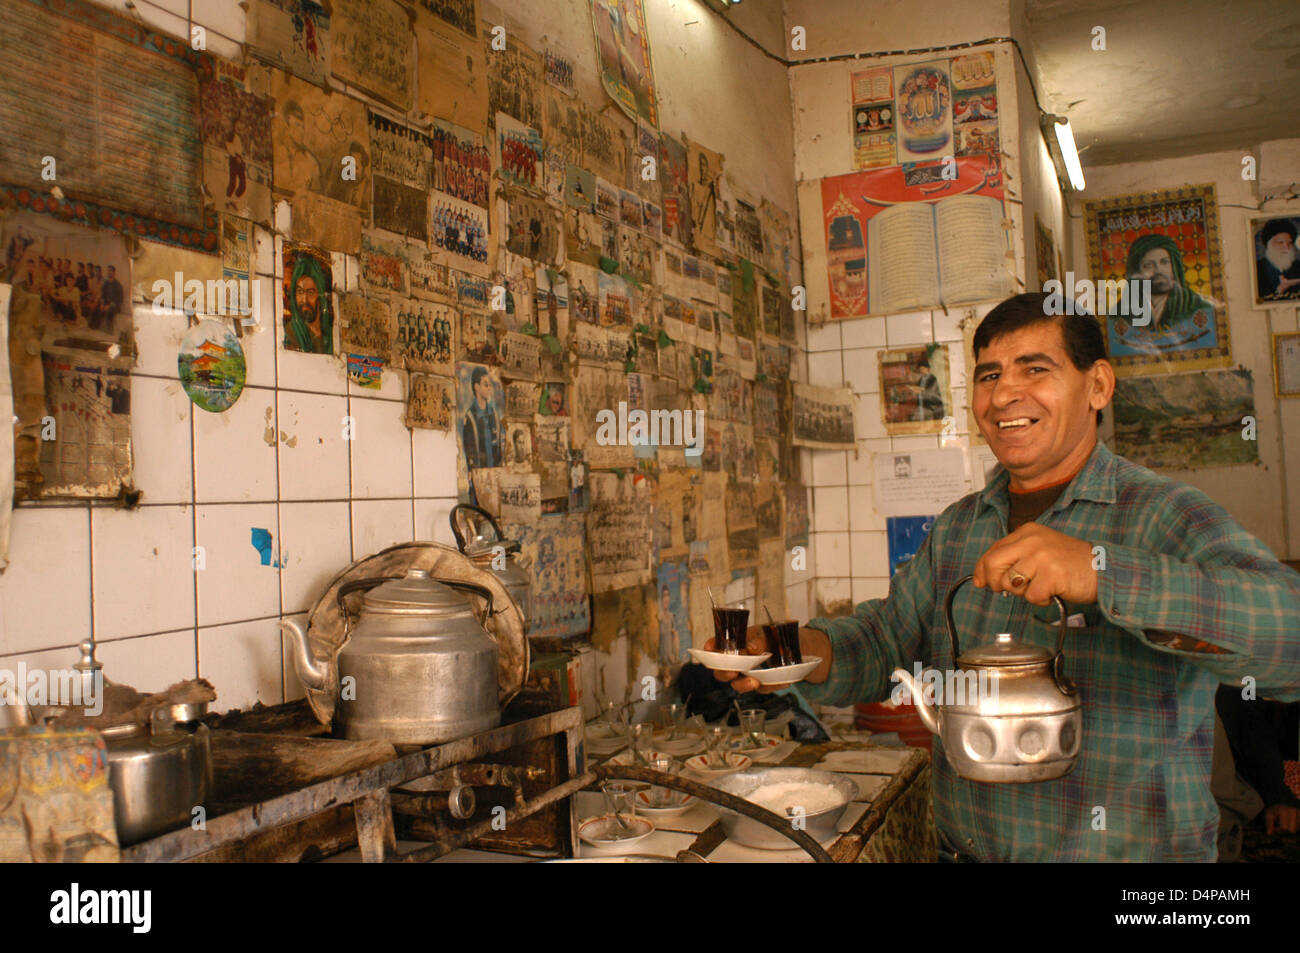 Tea Shop in Diwaniyah. Among the religious symbols and soccer players share the spotlight on the wall of the kitchen. Stock Photo